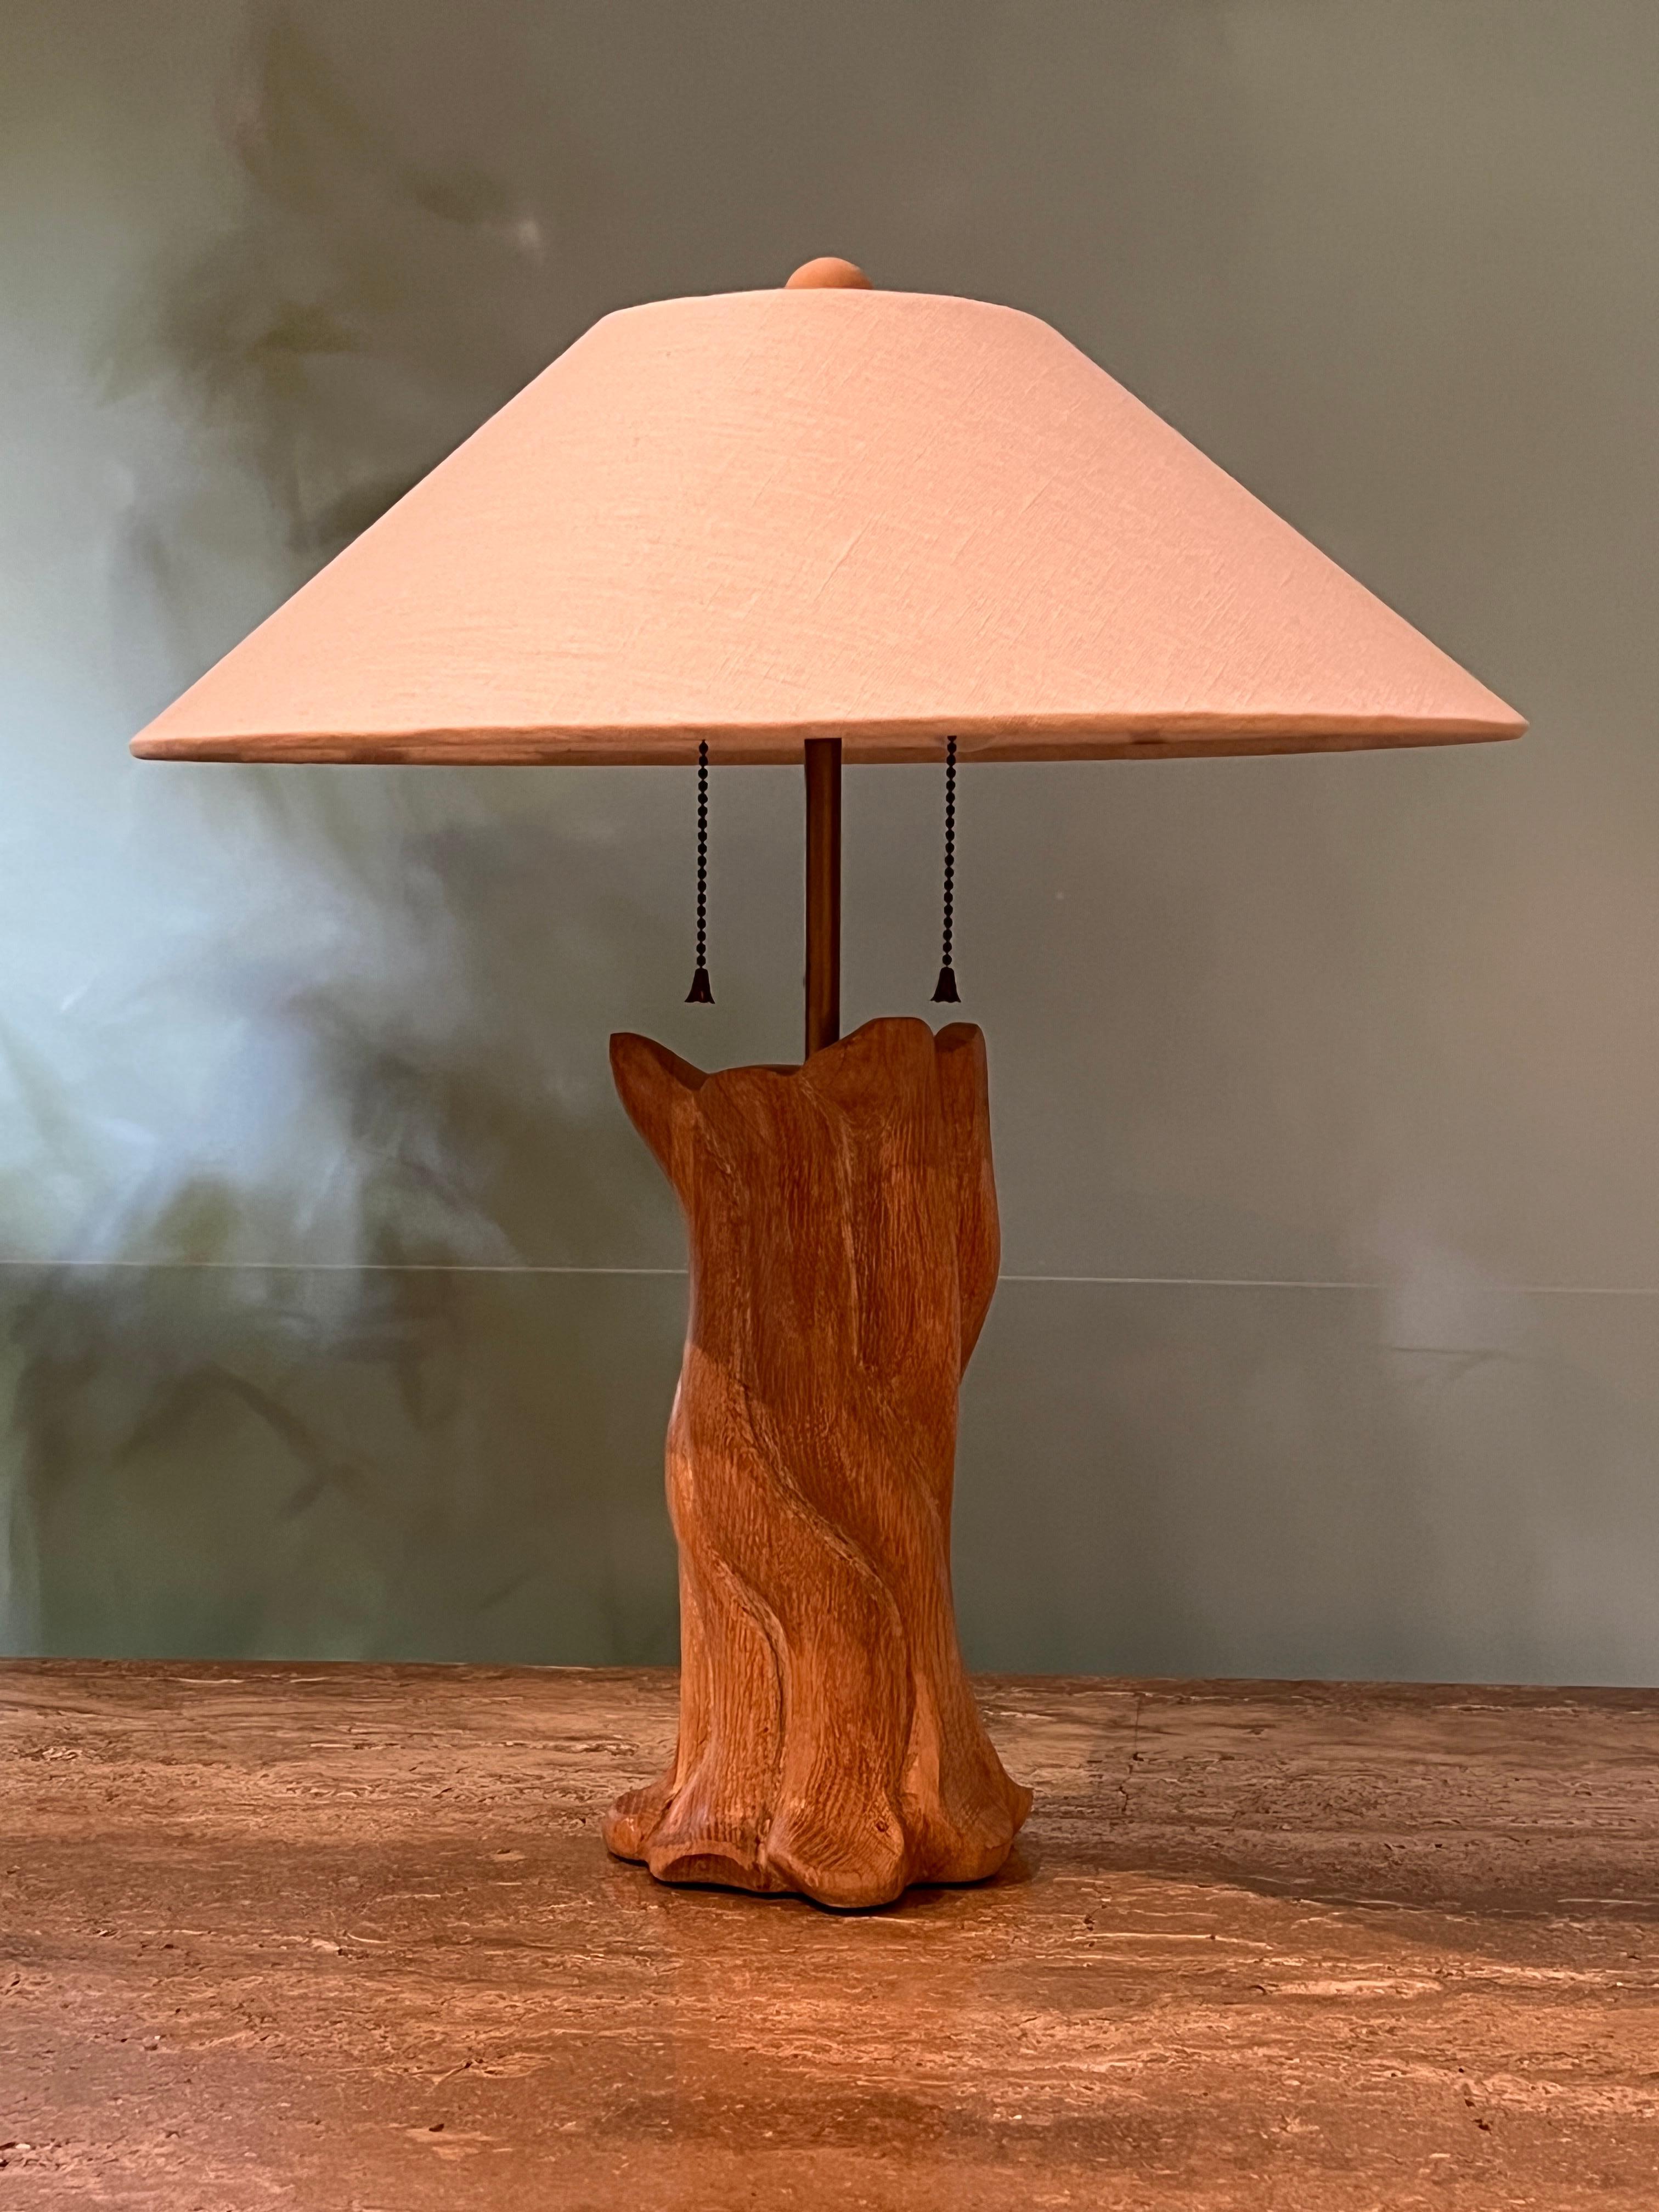 A rare carved oak 'Fairmont' table lamp designed by Russel Wright, 1935.